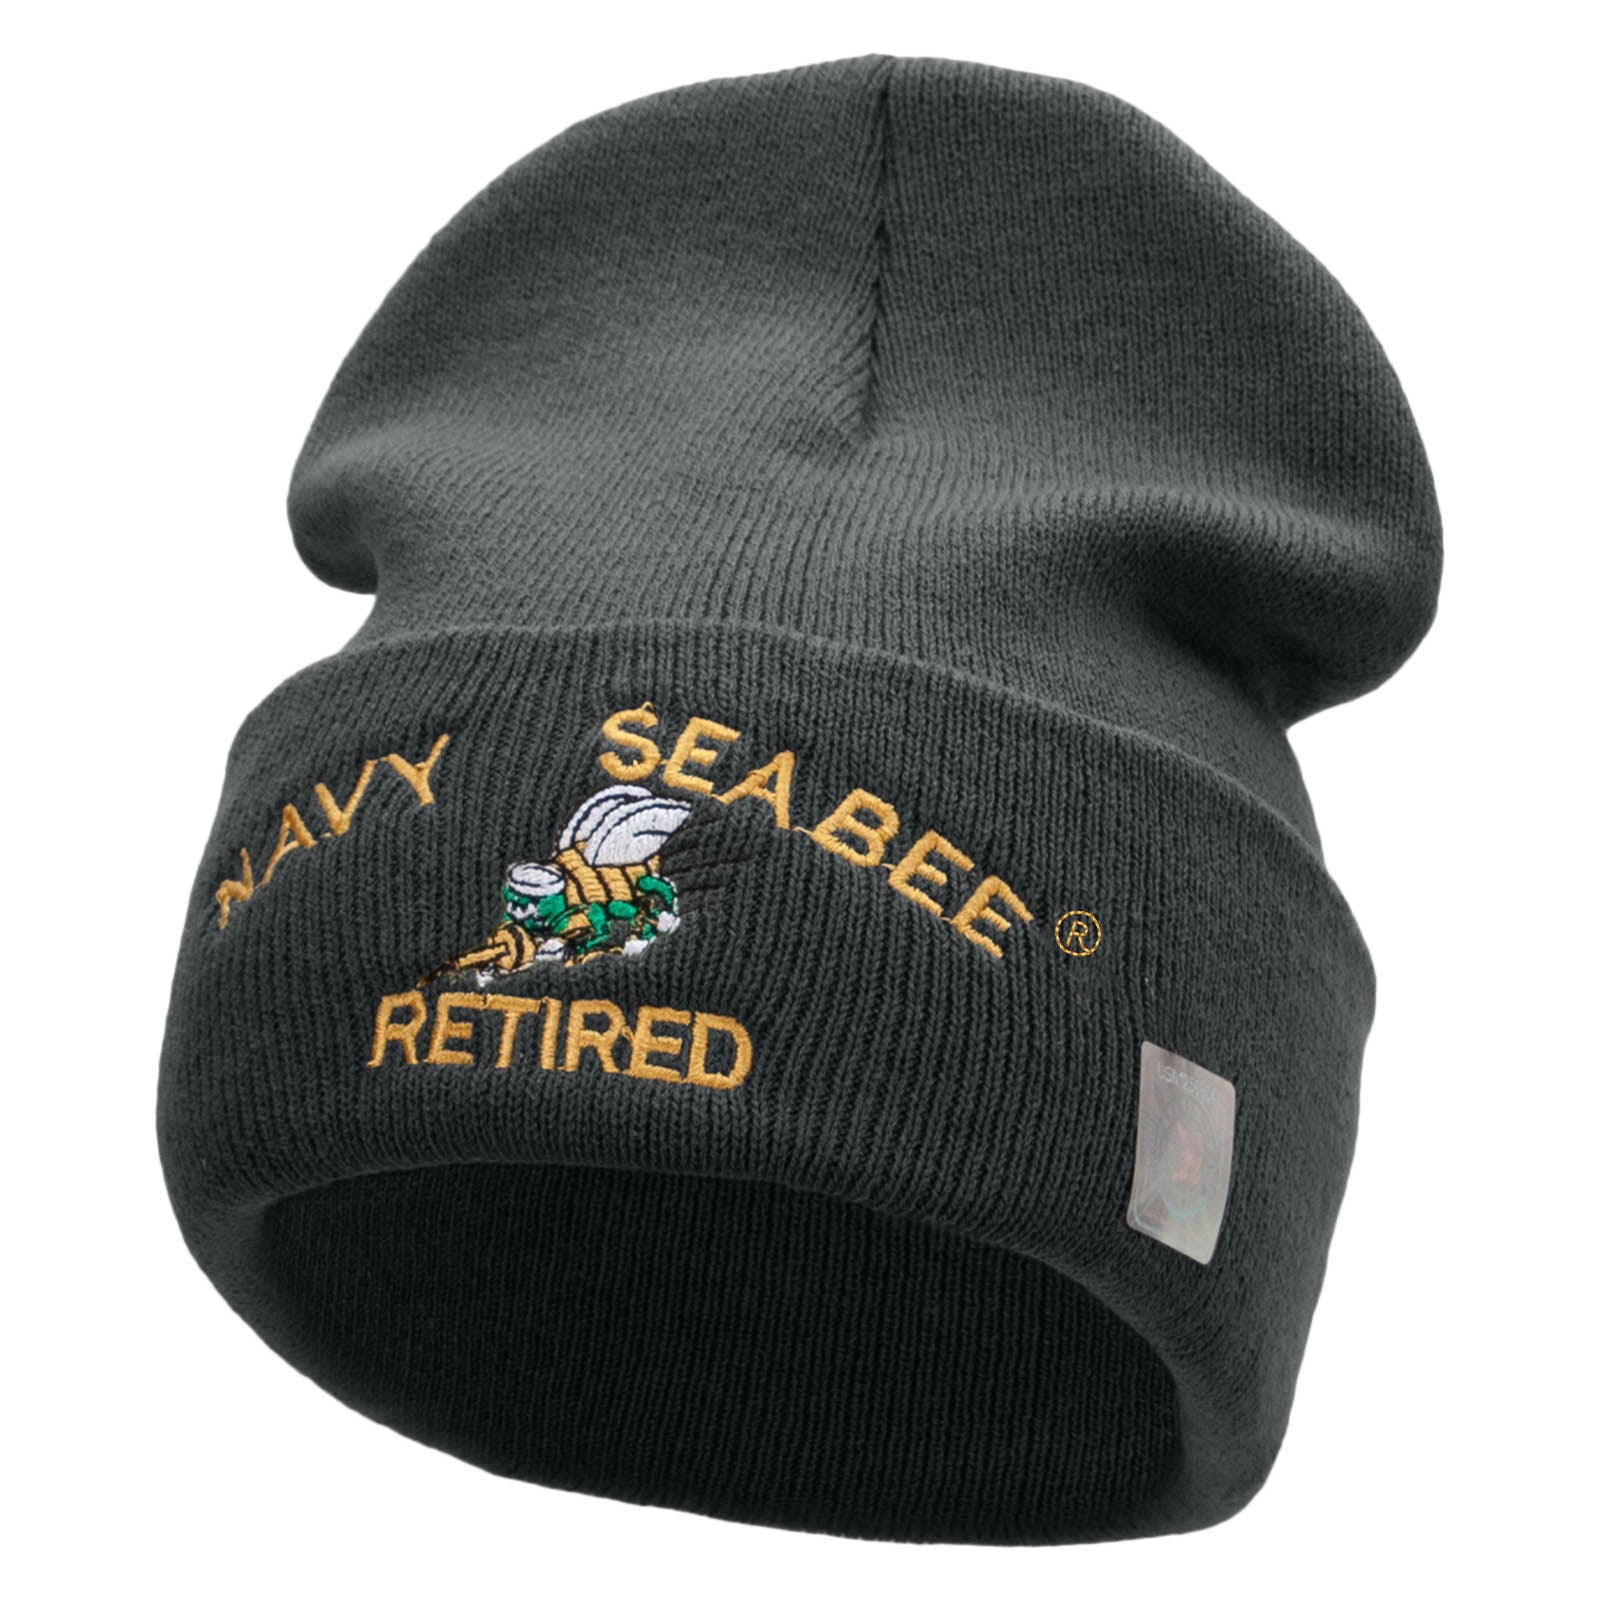 Licensed US Navy Seabee Retired Military Embroidered Long Beanie Made in USA - Dk Grey OSFM